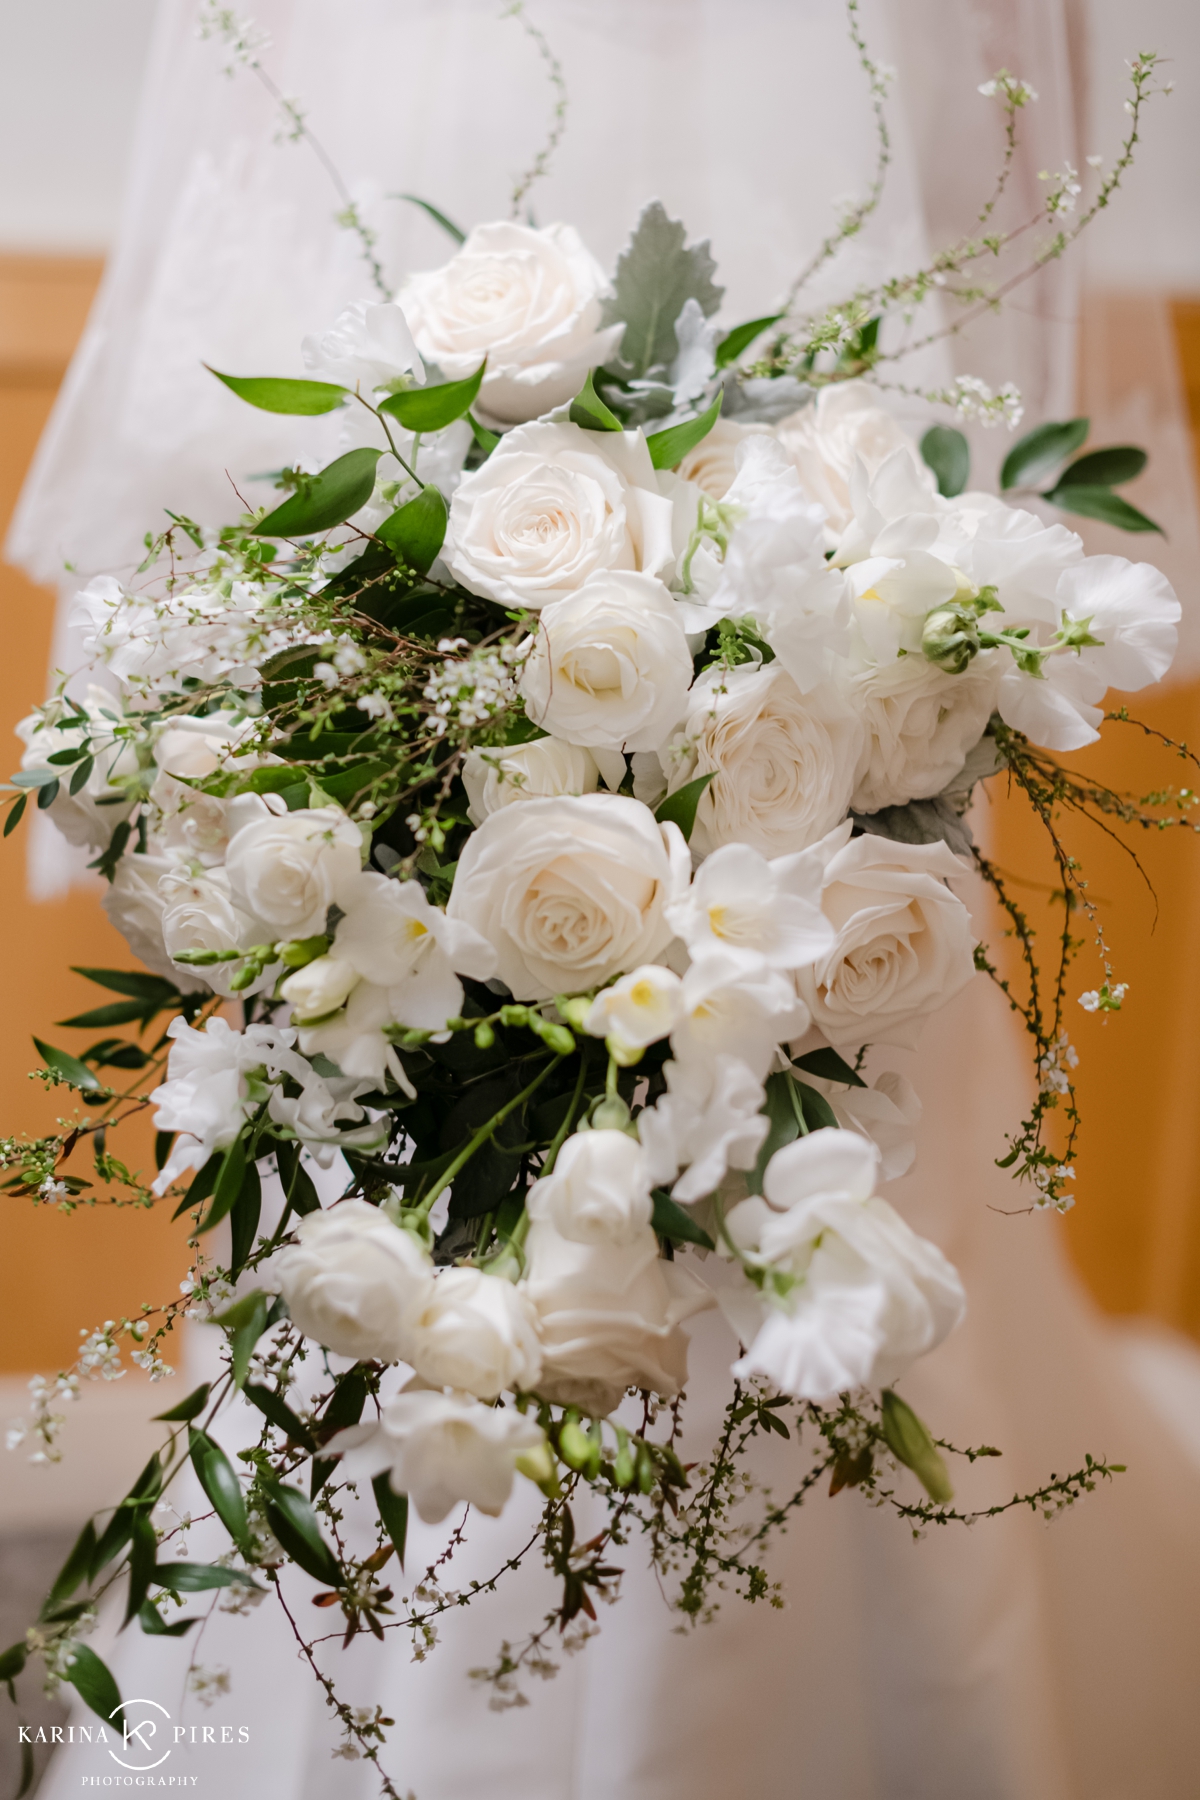 Winter wedding bouquet filled with white flowers and greenery